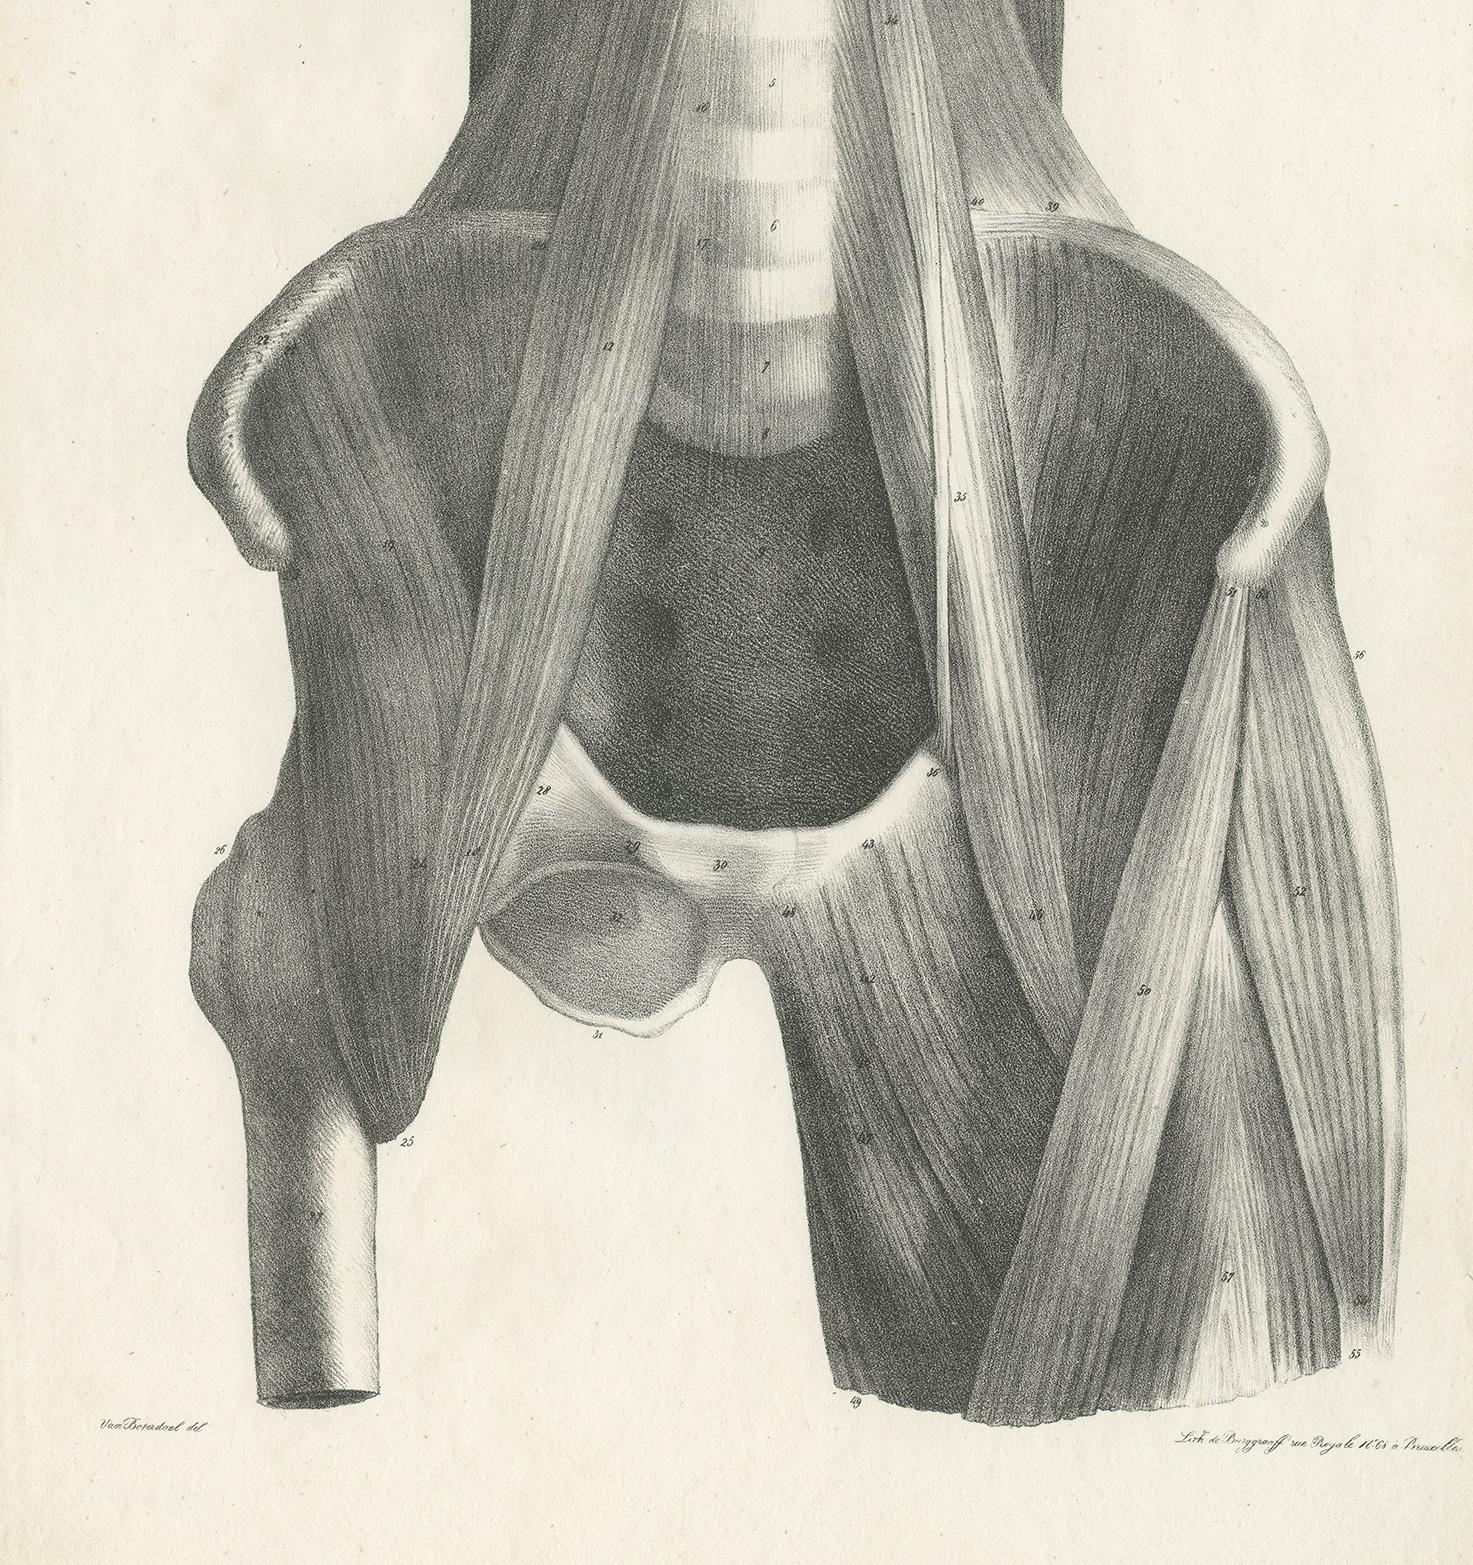 19th Century Pl. LXXIX Antique Anatomy / Medical Print of the Thigh by Cloquet '1821' For Sale